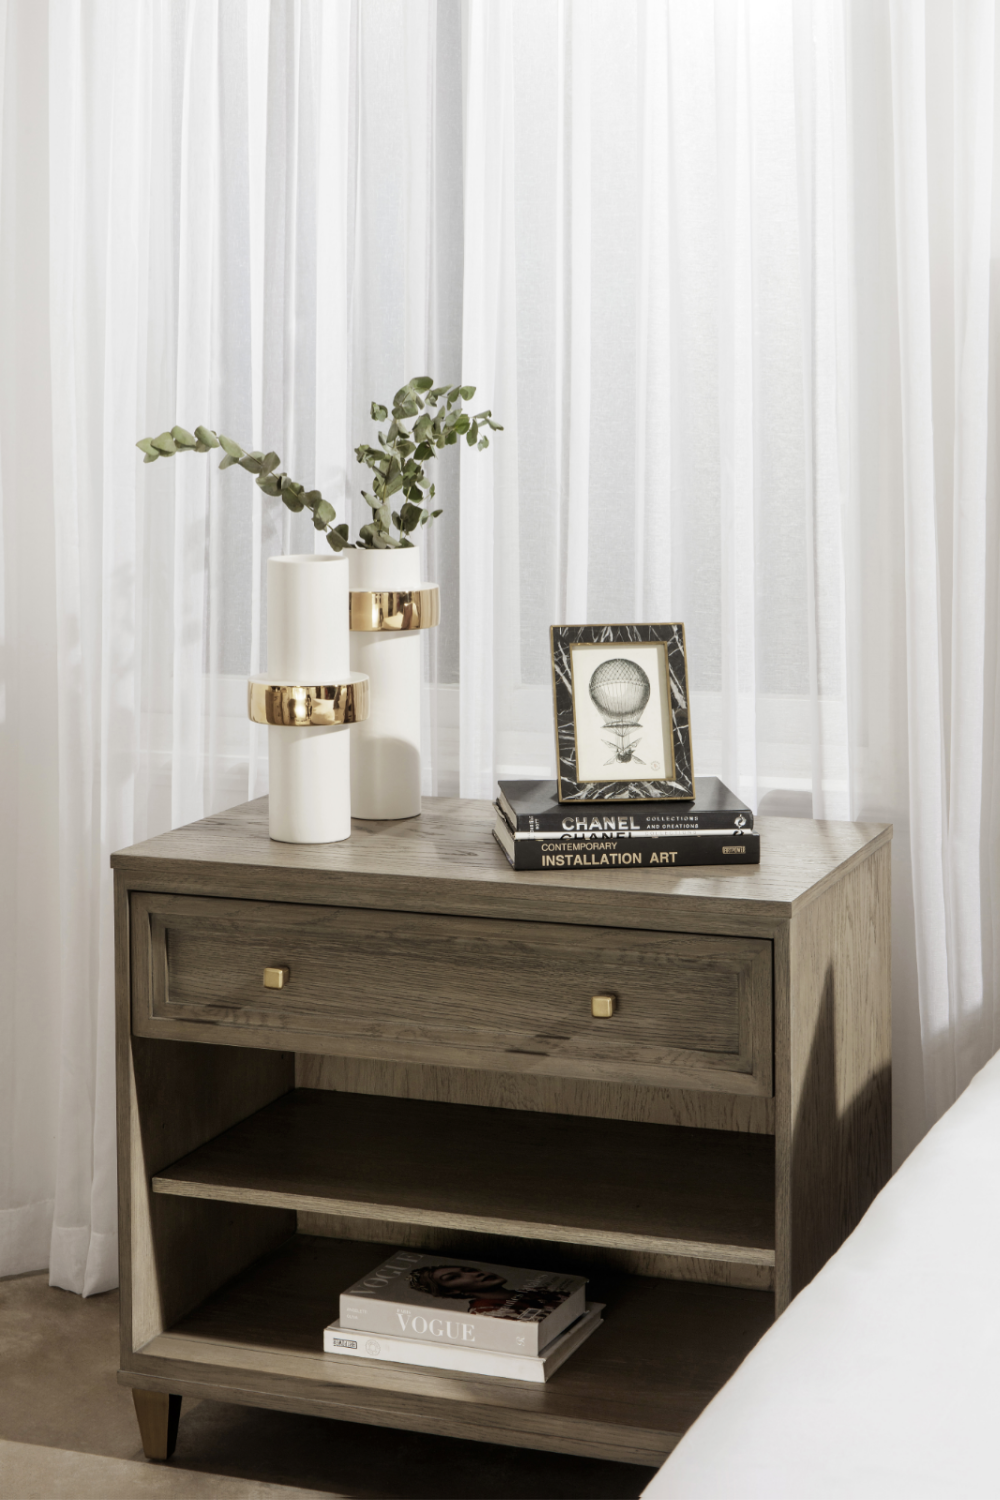 Taupe Oak One Drawer Nightstand | Andrew Martin Claiborne | OROA